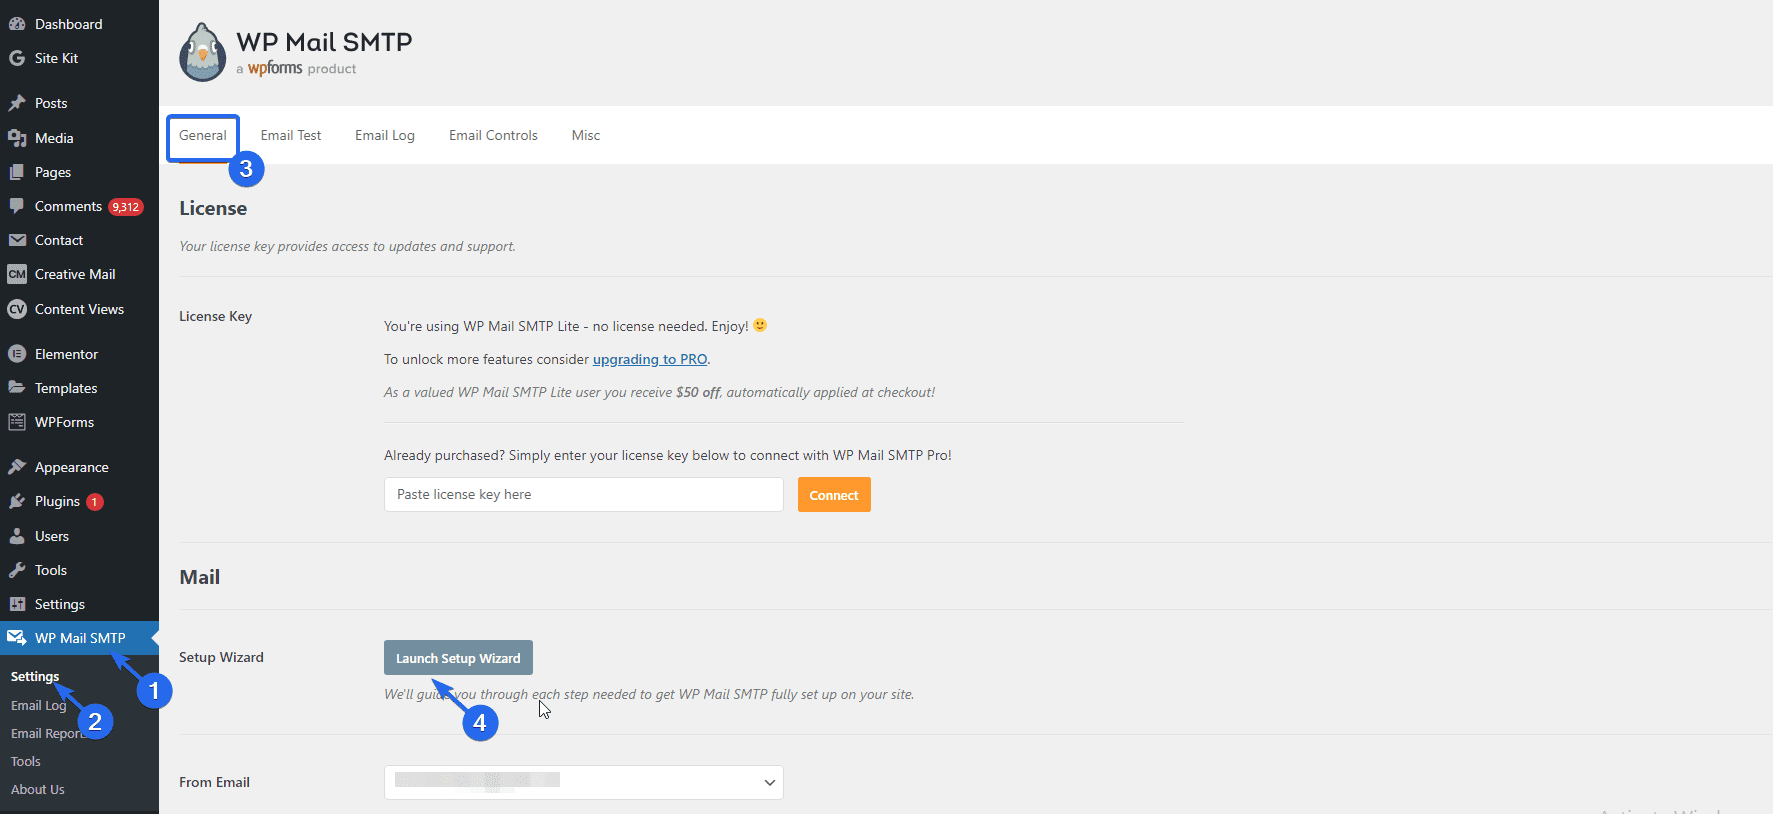 WP Mail SMTP Settings page - WordPress not sending emails